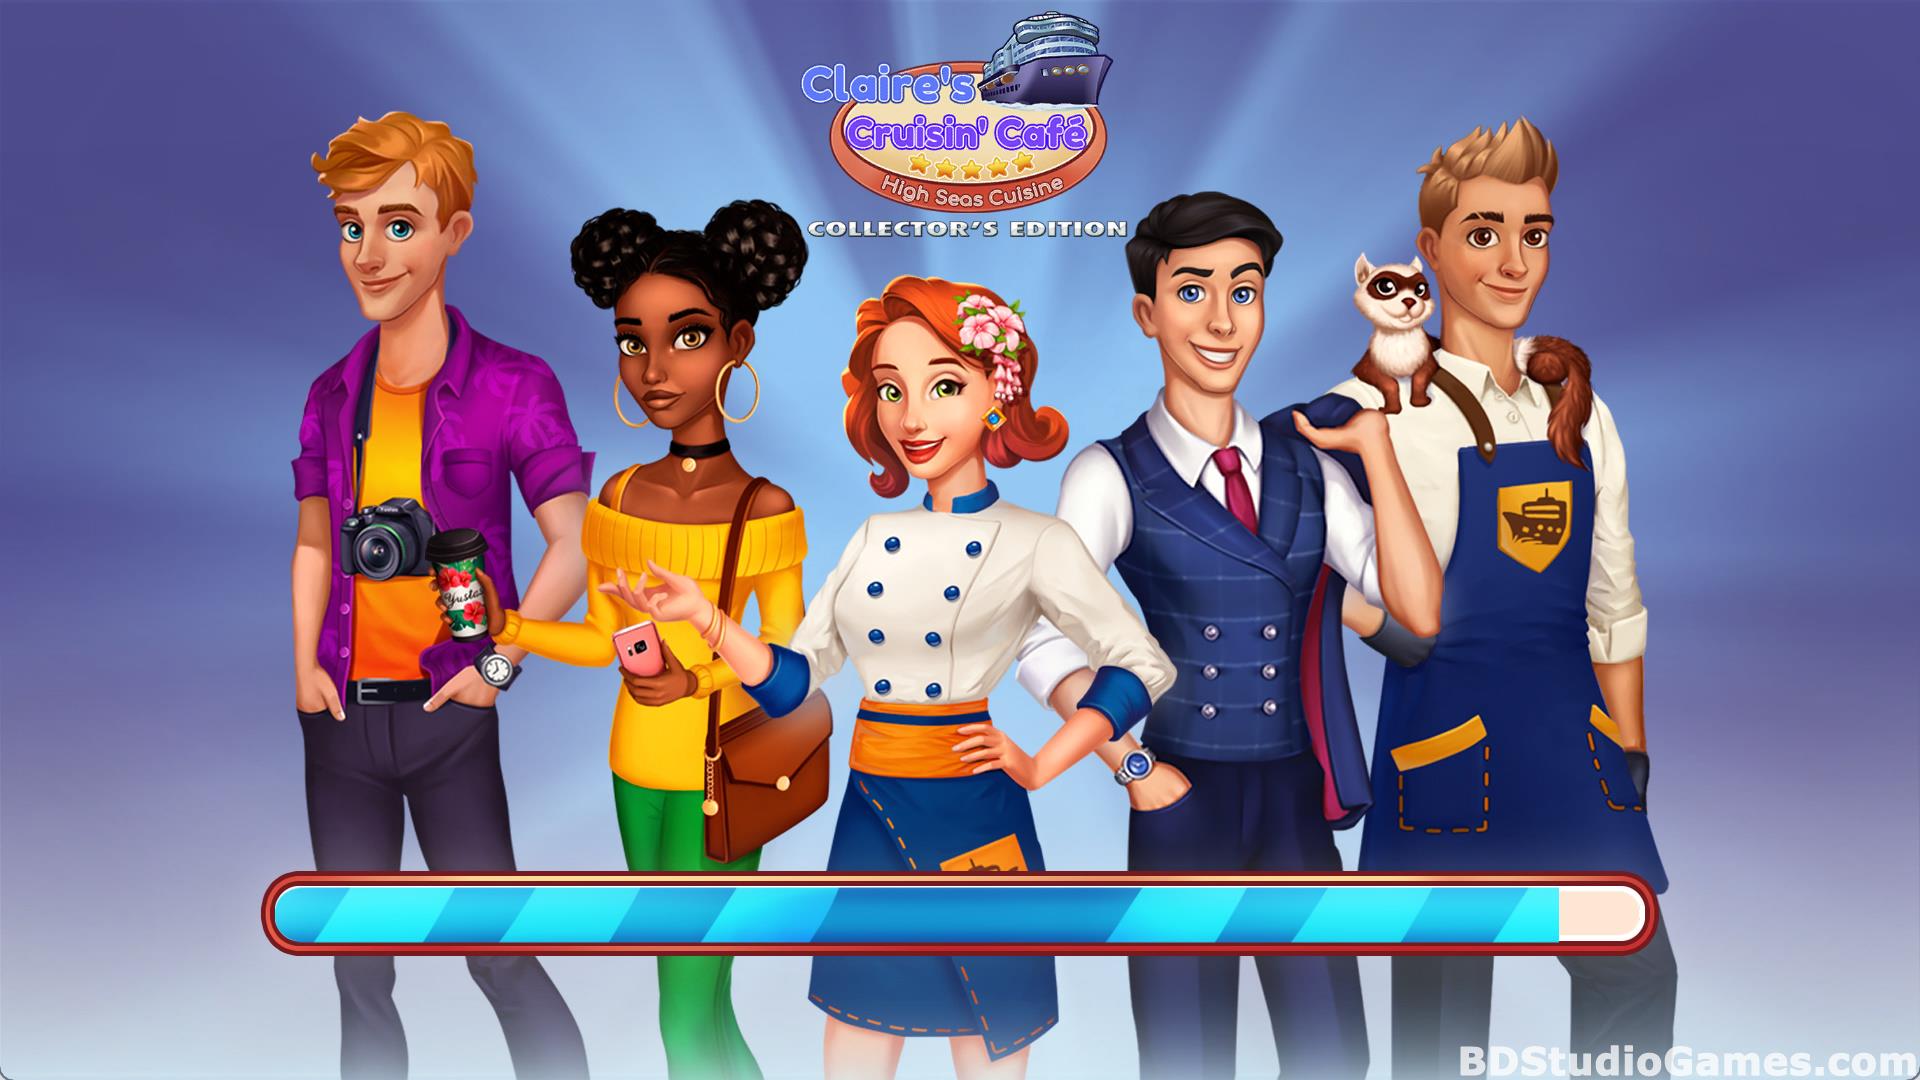 Claire's Cruisin' Cafe: High Seas Collector's Edition Free Download Screenshots 11